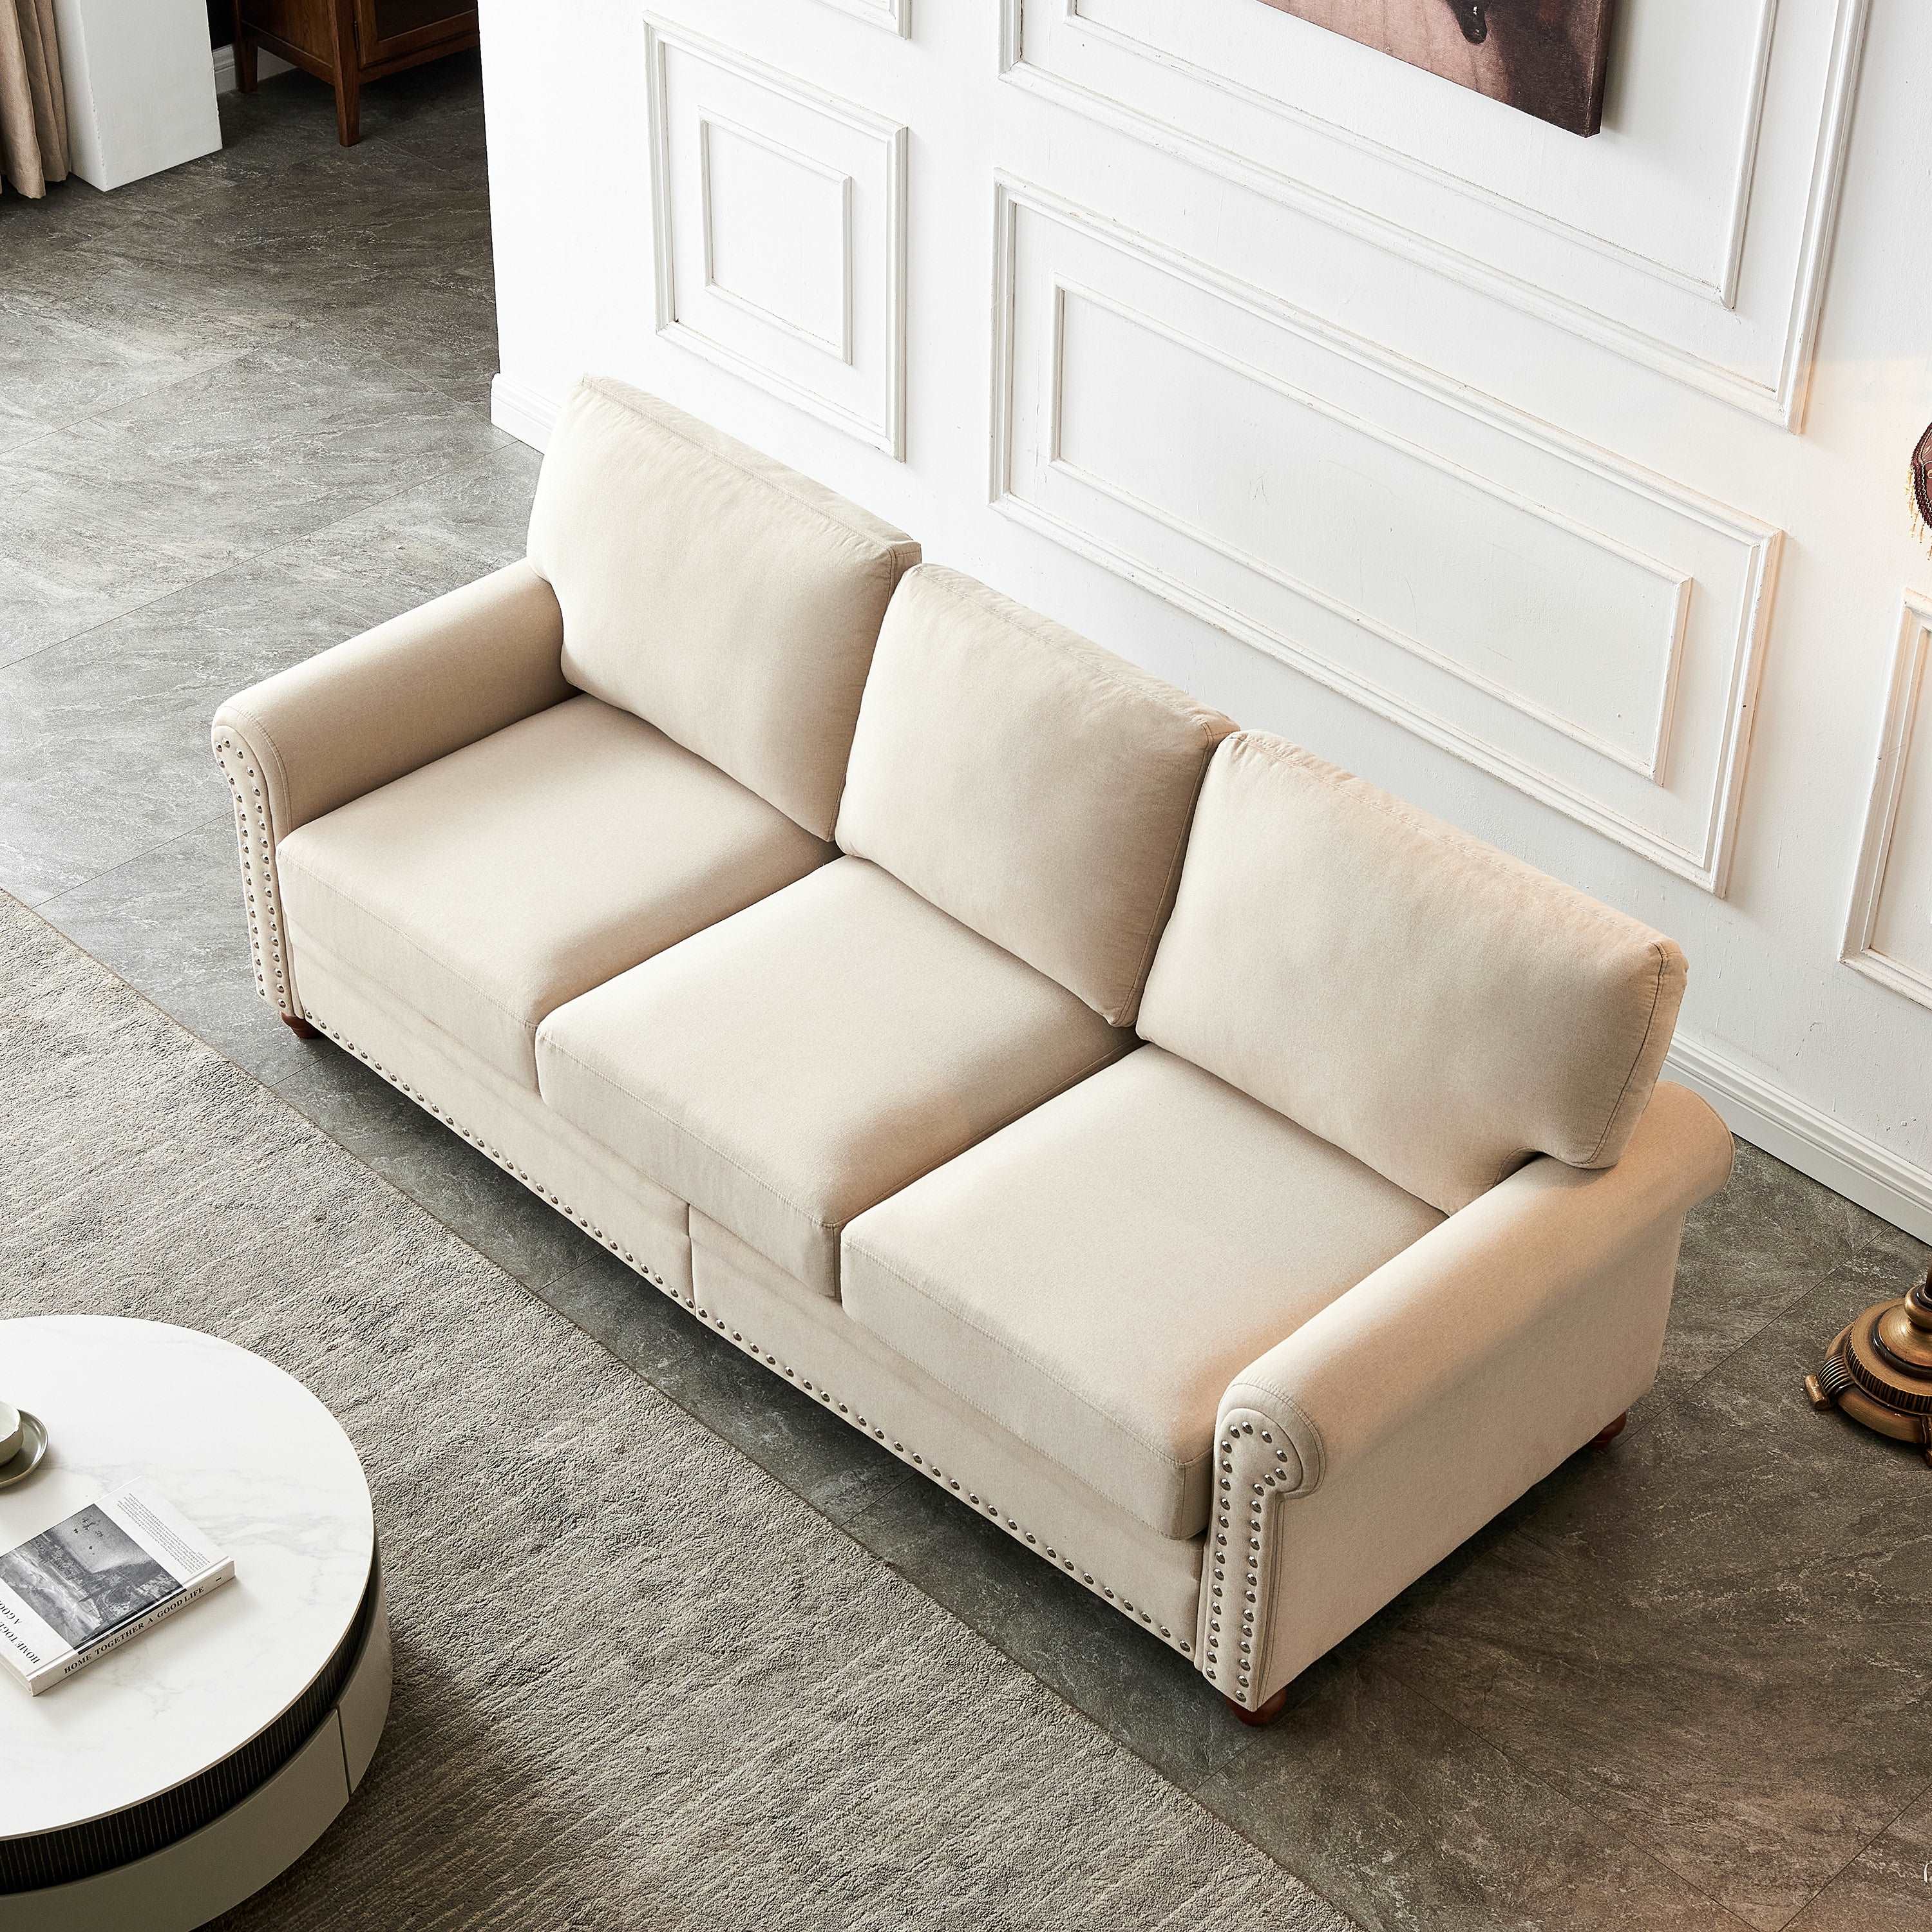 Bellemave 82.68“ Linen Fabric Upholstery with Storage Sofa